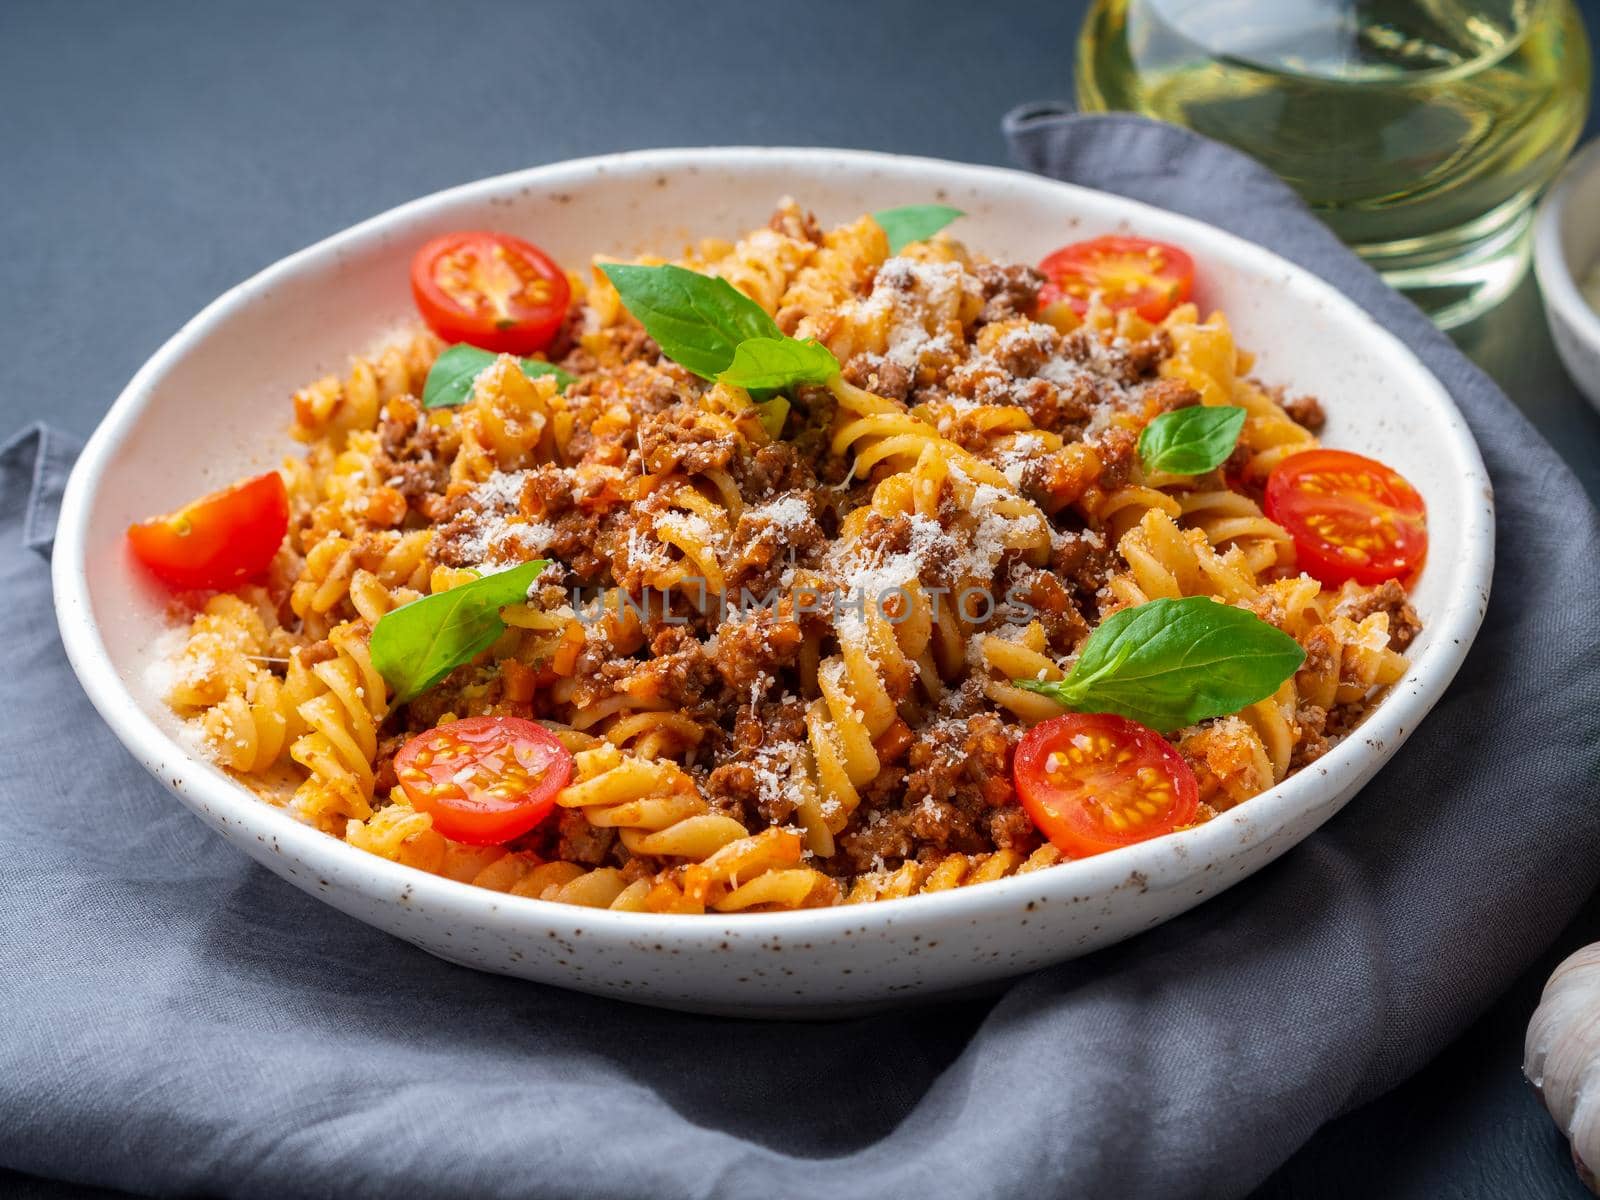 Bolognese pasta. Fusilli with tomato sauce, ground minced beef, basil leaves. Traditional italian cuisine. Side view.